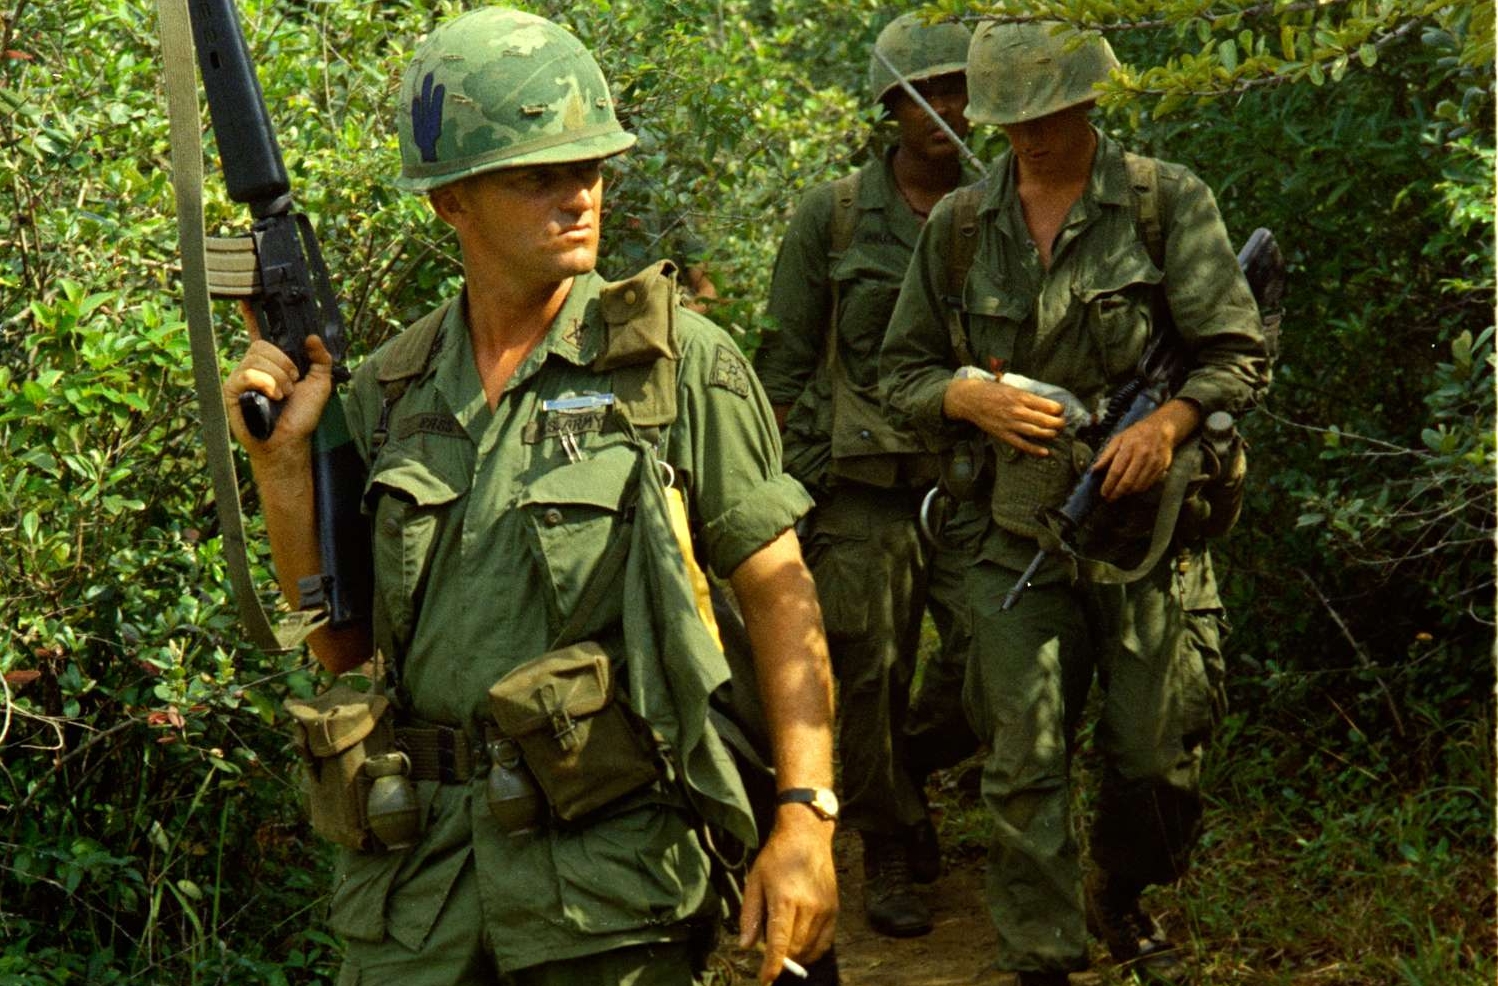 Captain Larry W. Bass and Other Members of His Company Come out of a Viet Cong Cave